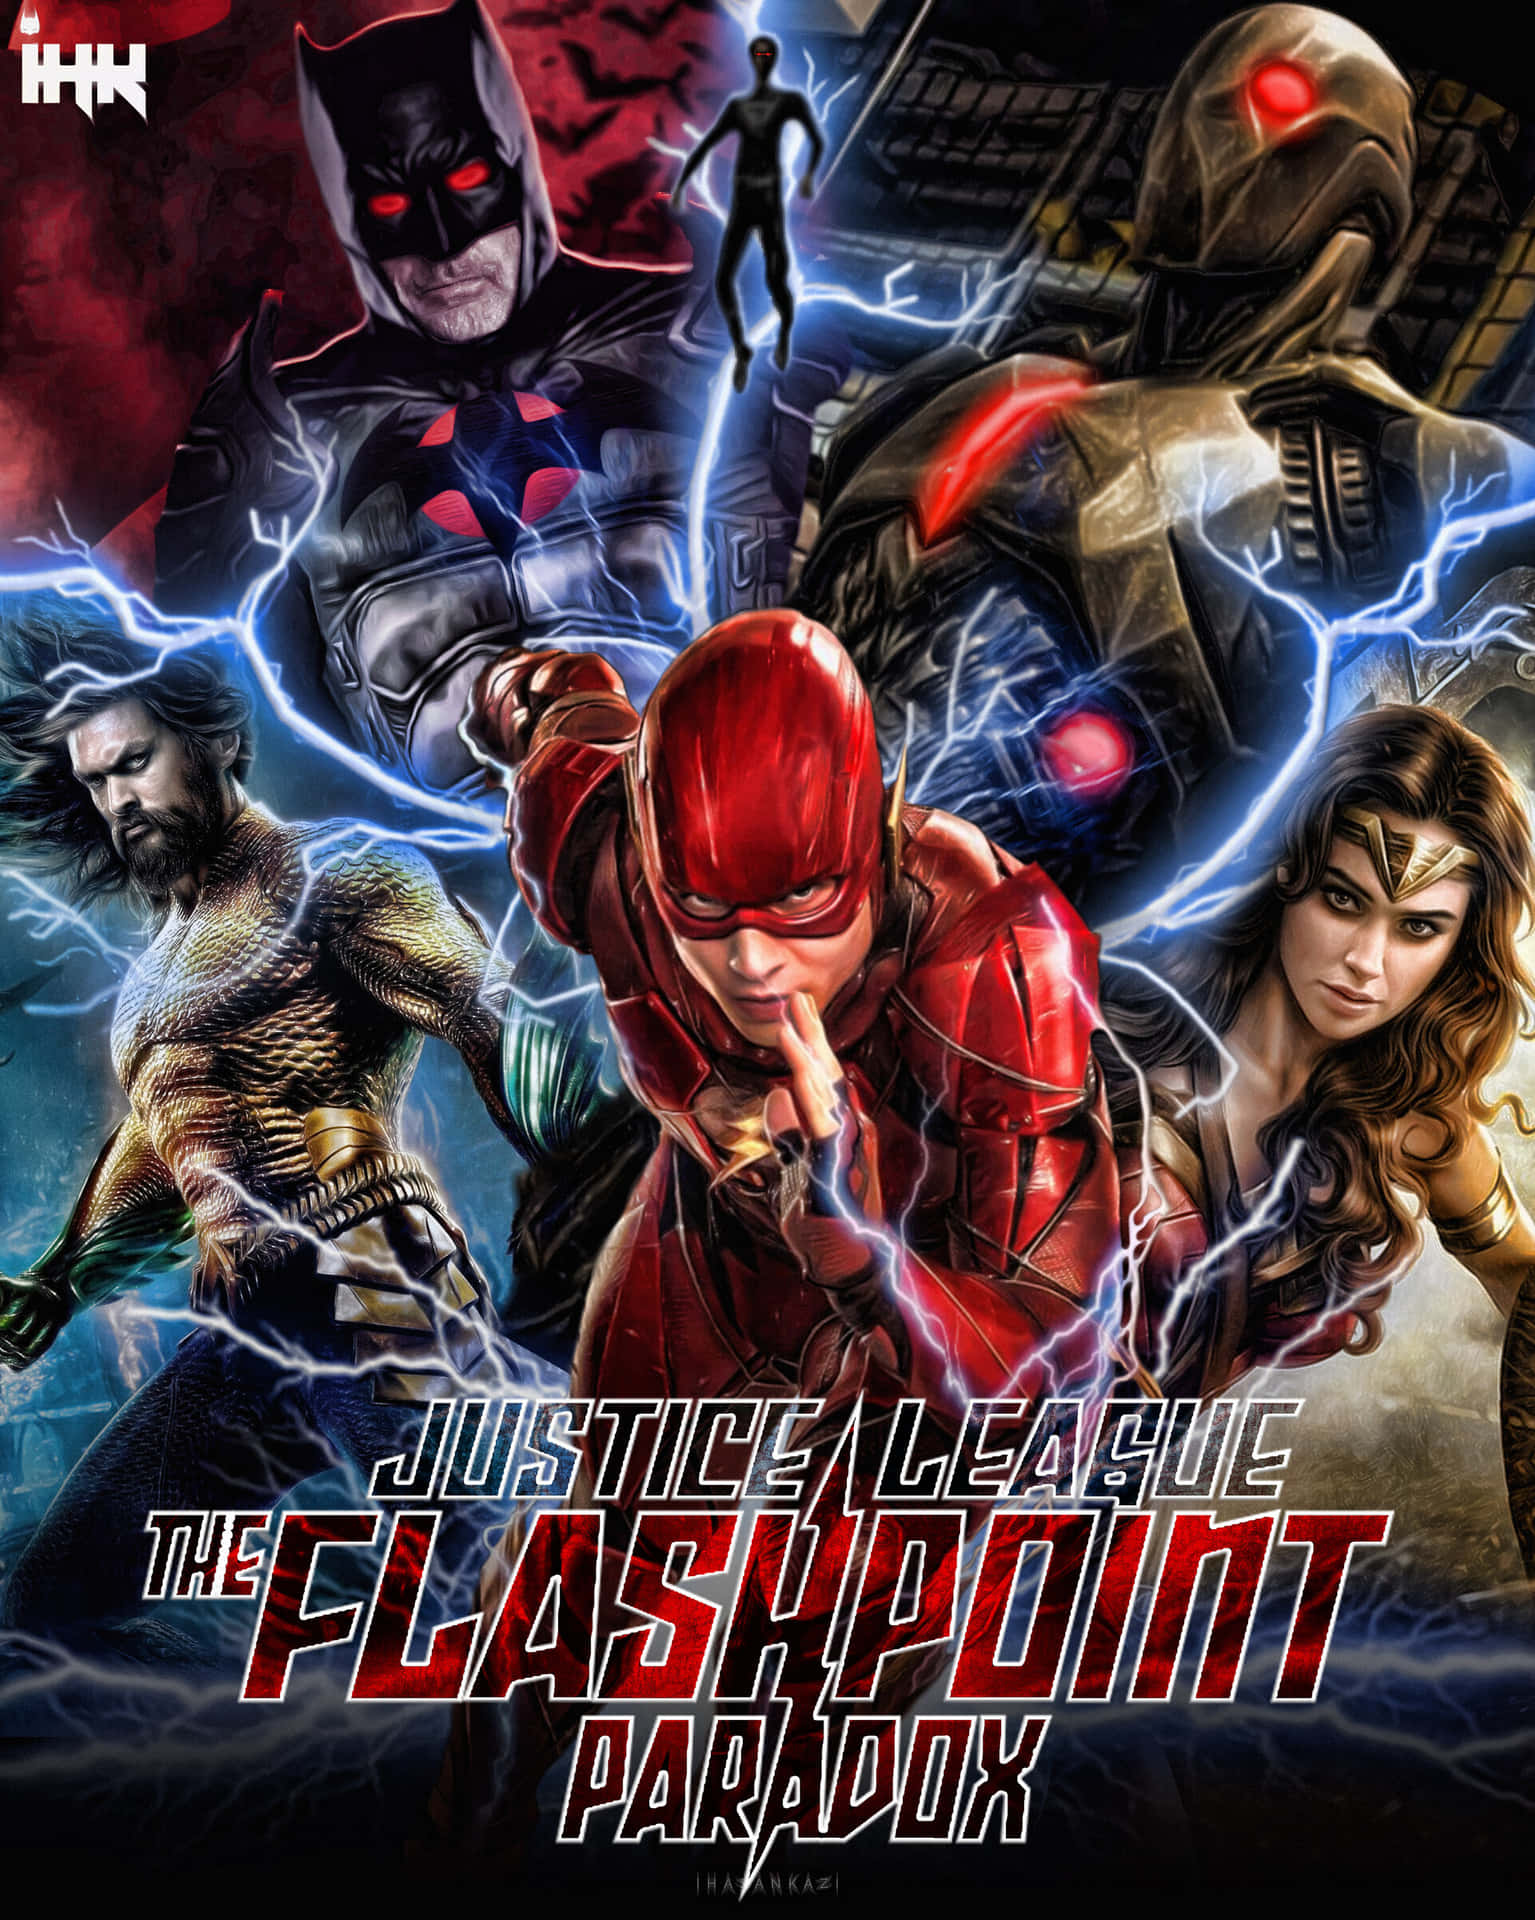 The Flash in an intense moment during Justice League: The Flashpoint Paradox Wallpaper